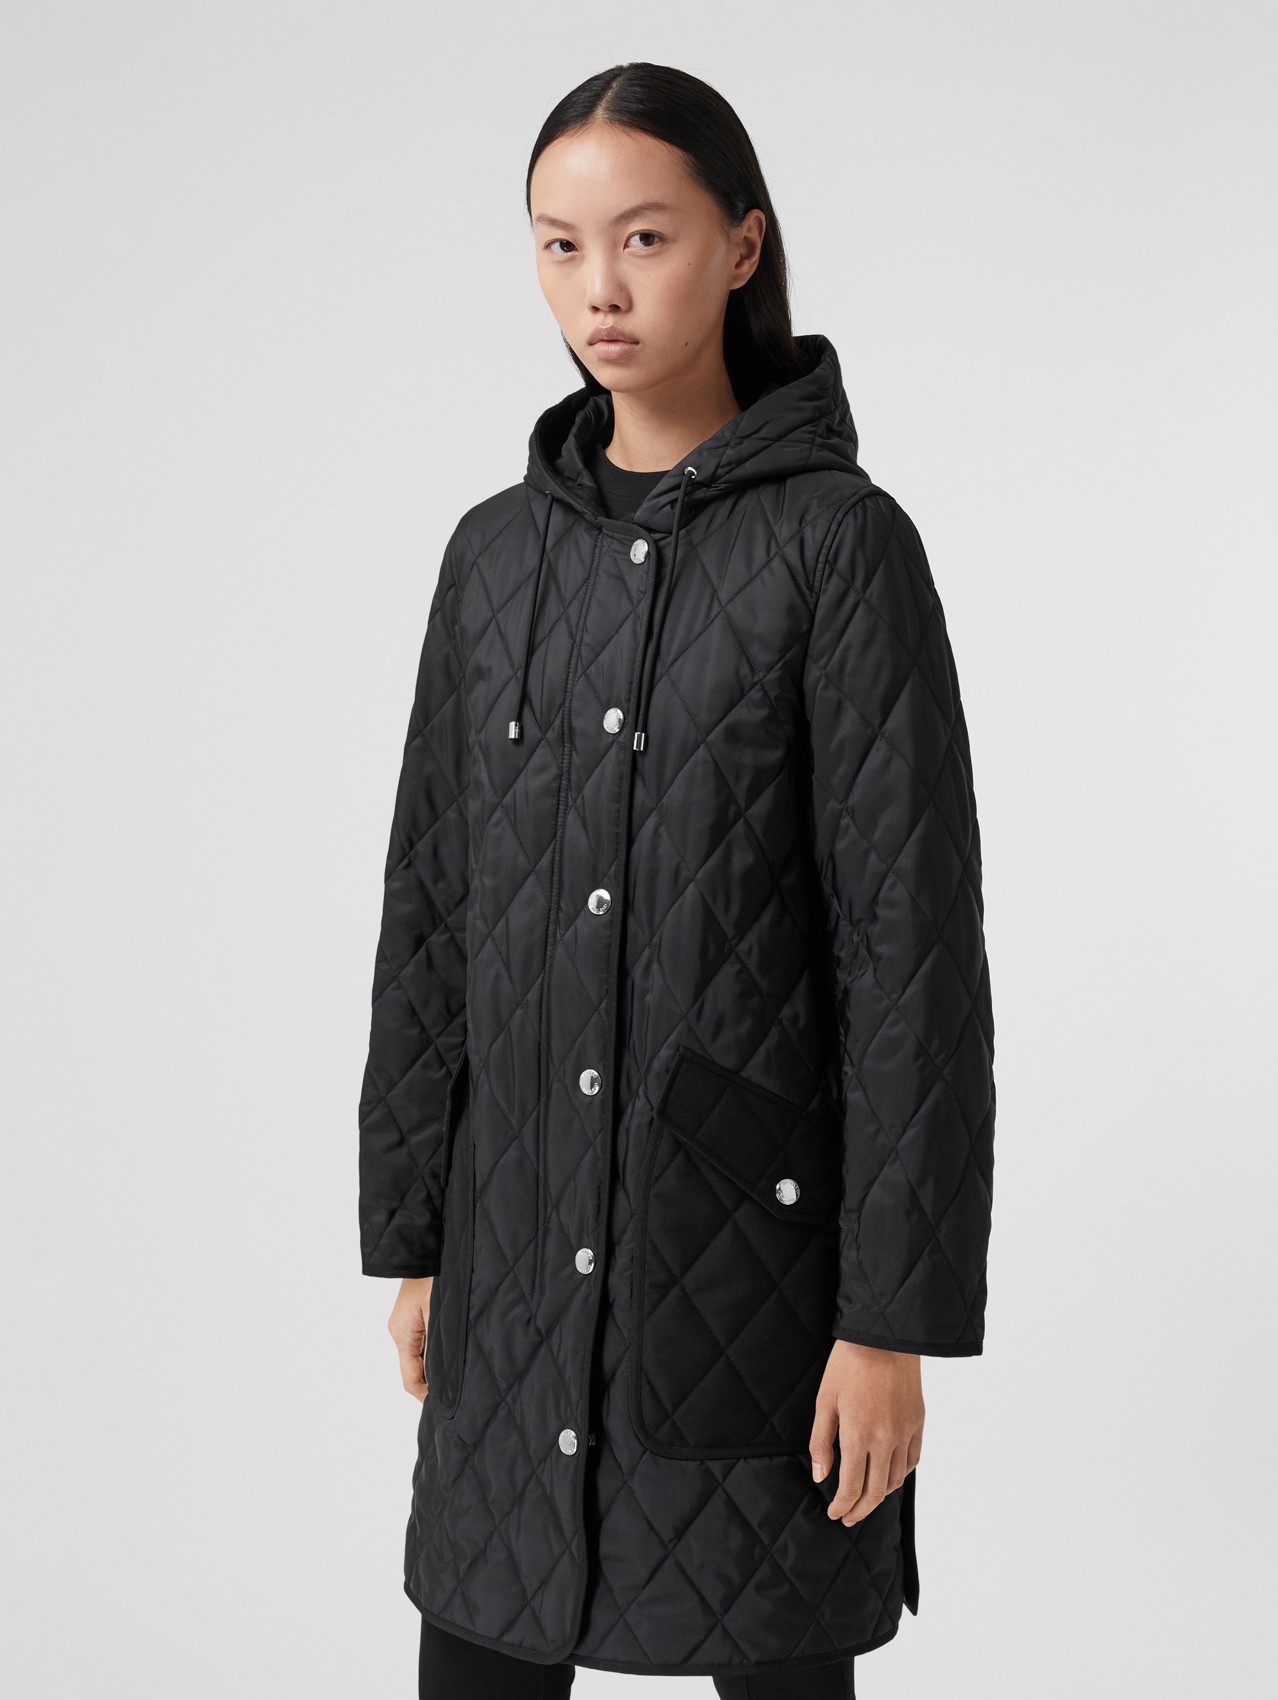 Diamond Quilted Thermoregulated Hooded Coat in Black